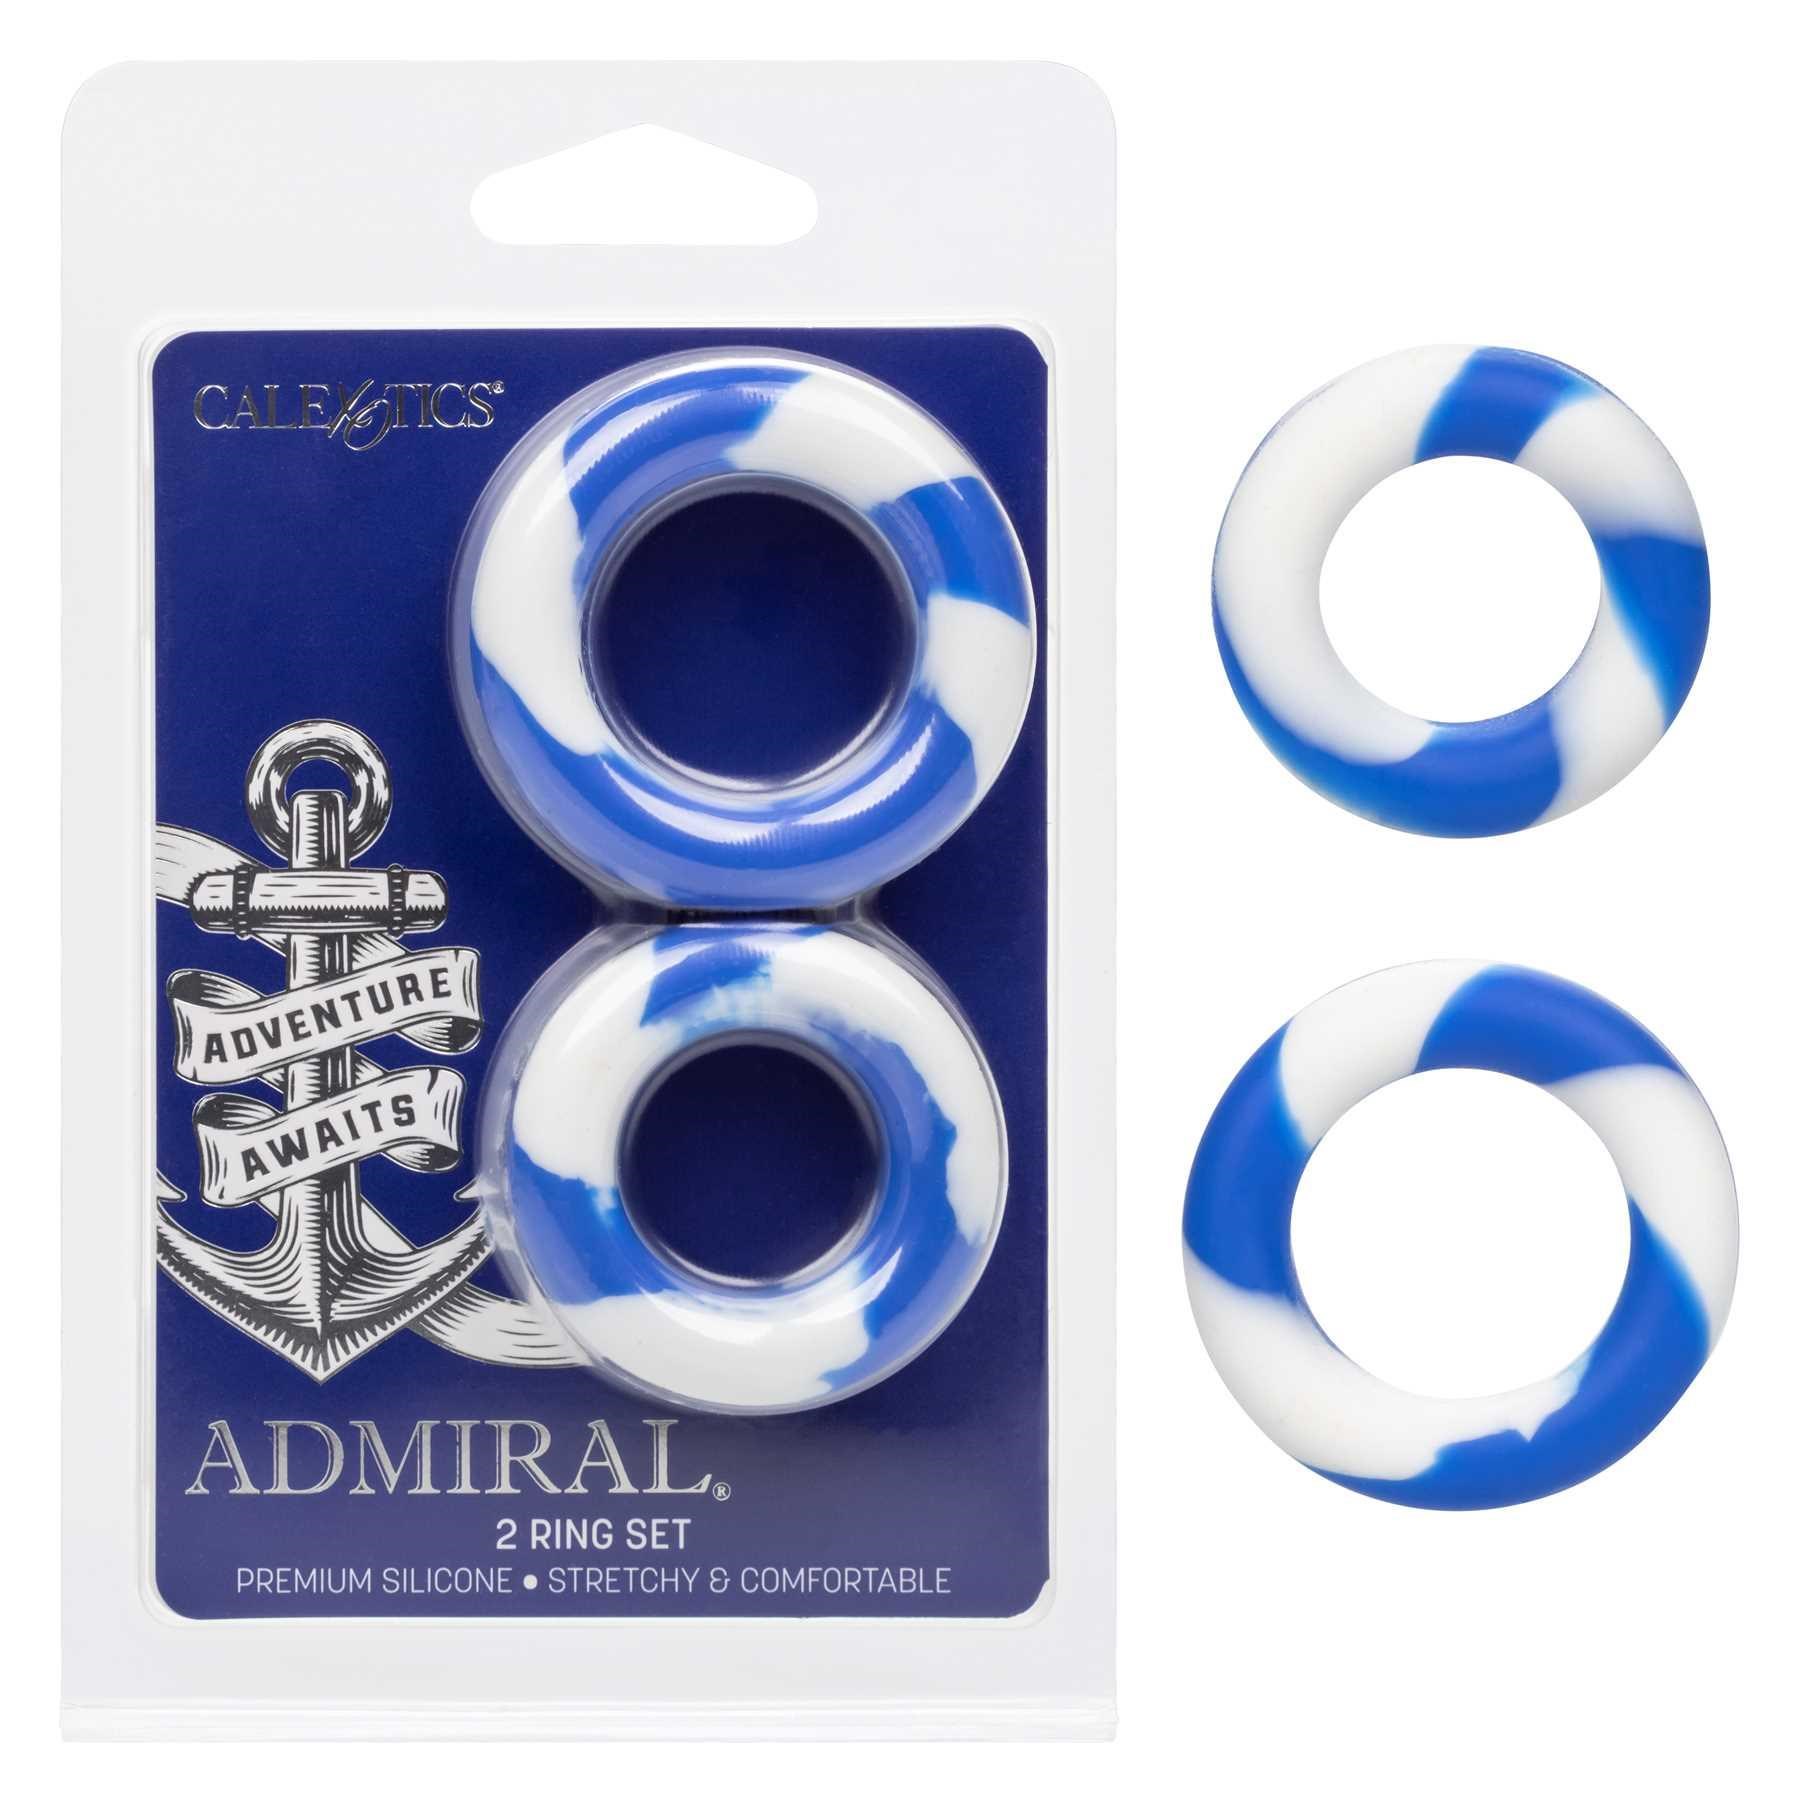 Admiral 2 Ring Set front of package with rings beside it